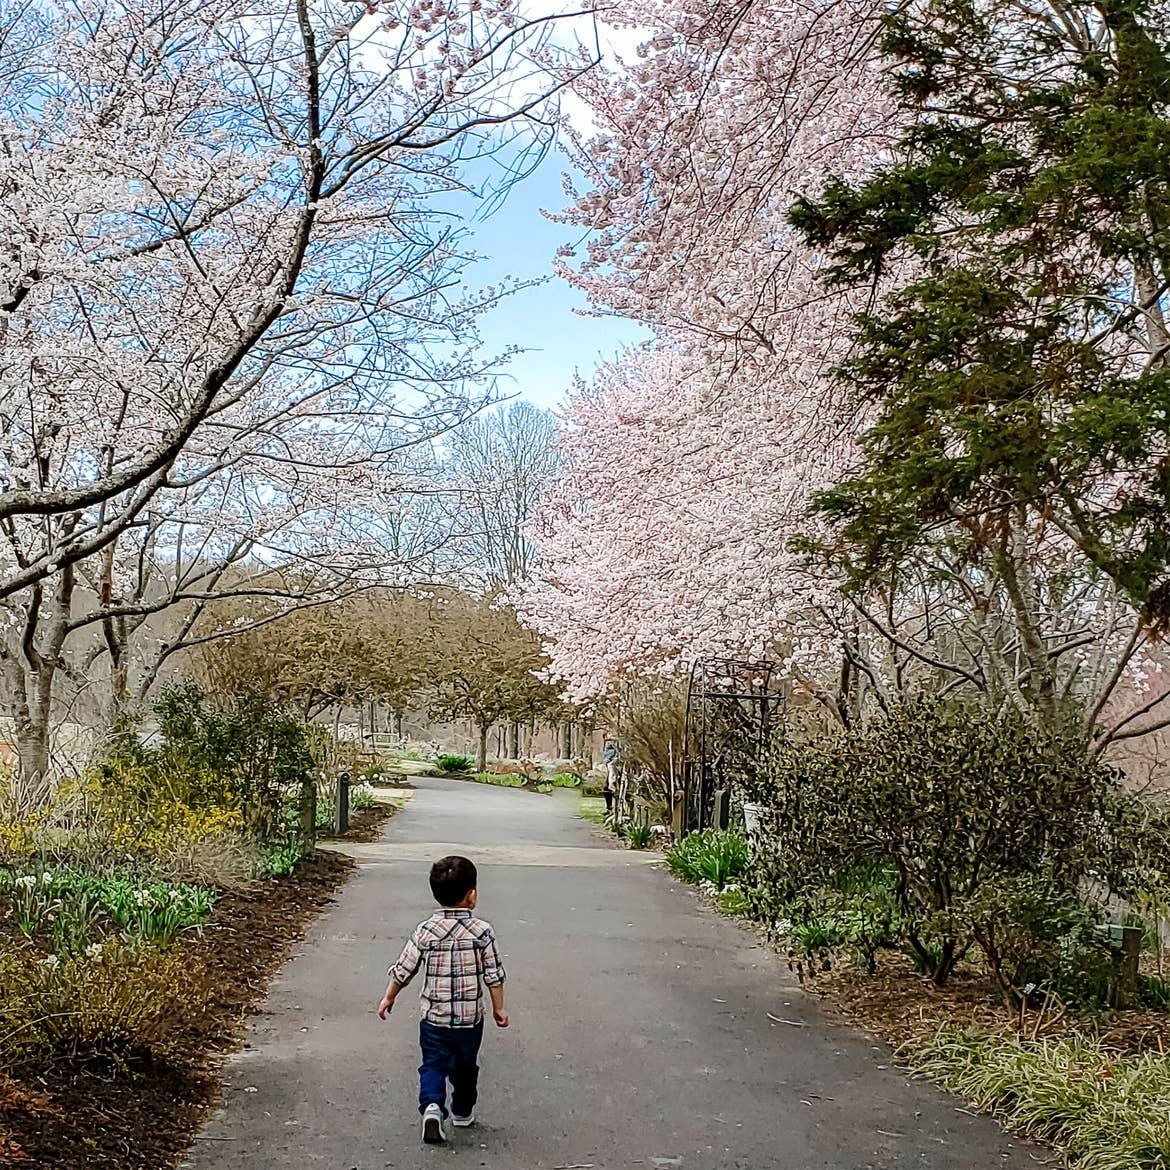 A young toddler on a walking path surrounded by cherry blossom trees.